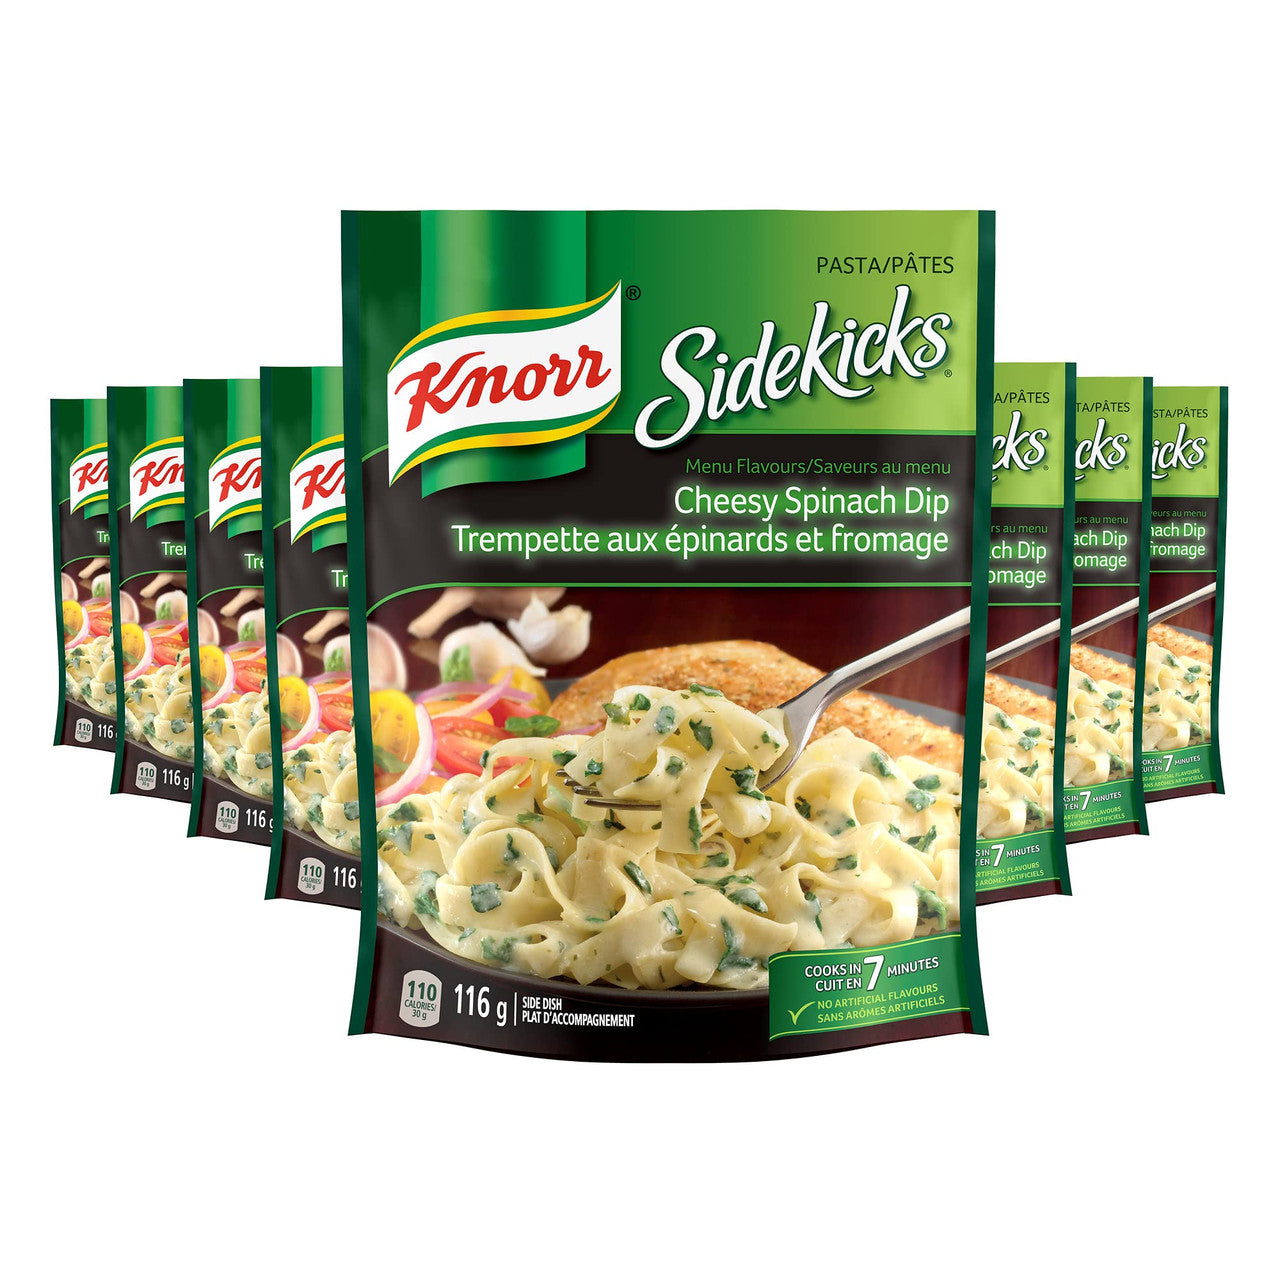 Knorr Sidekicks, Cheesy Spinach Dip Pasta, Side Dishes, 116g/4.1oz, 8ct, {Imported from Canada}